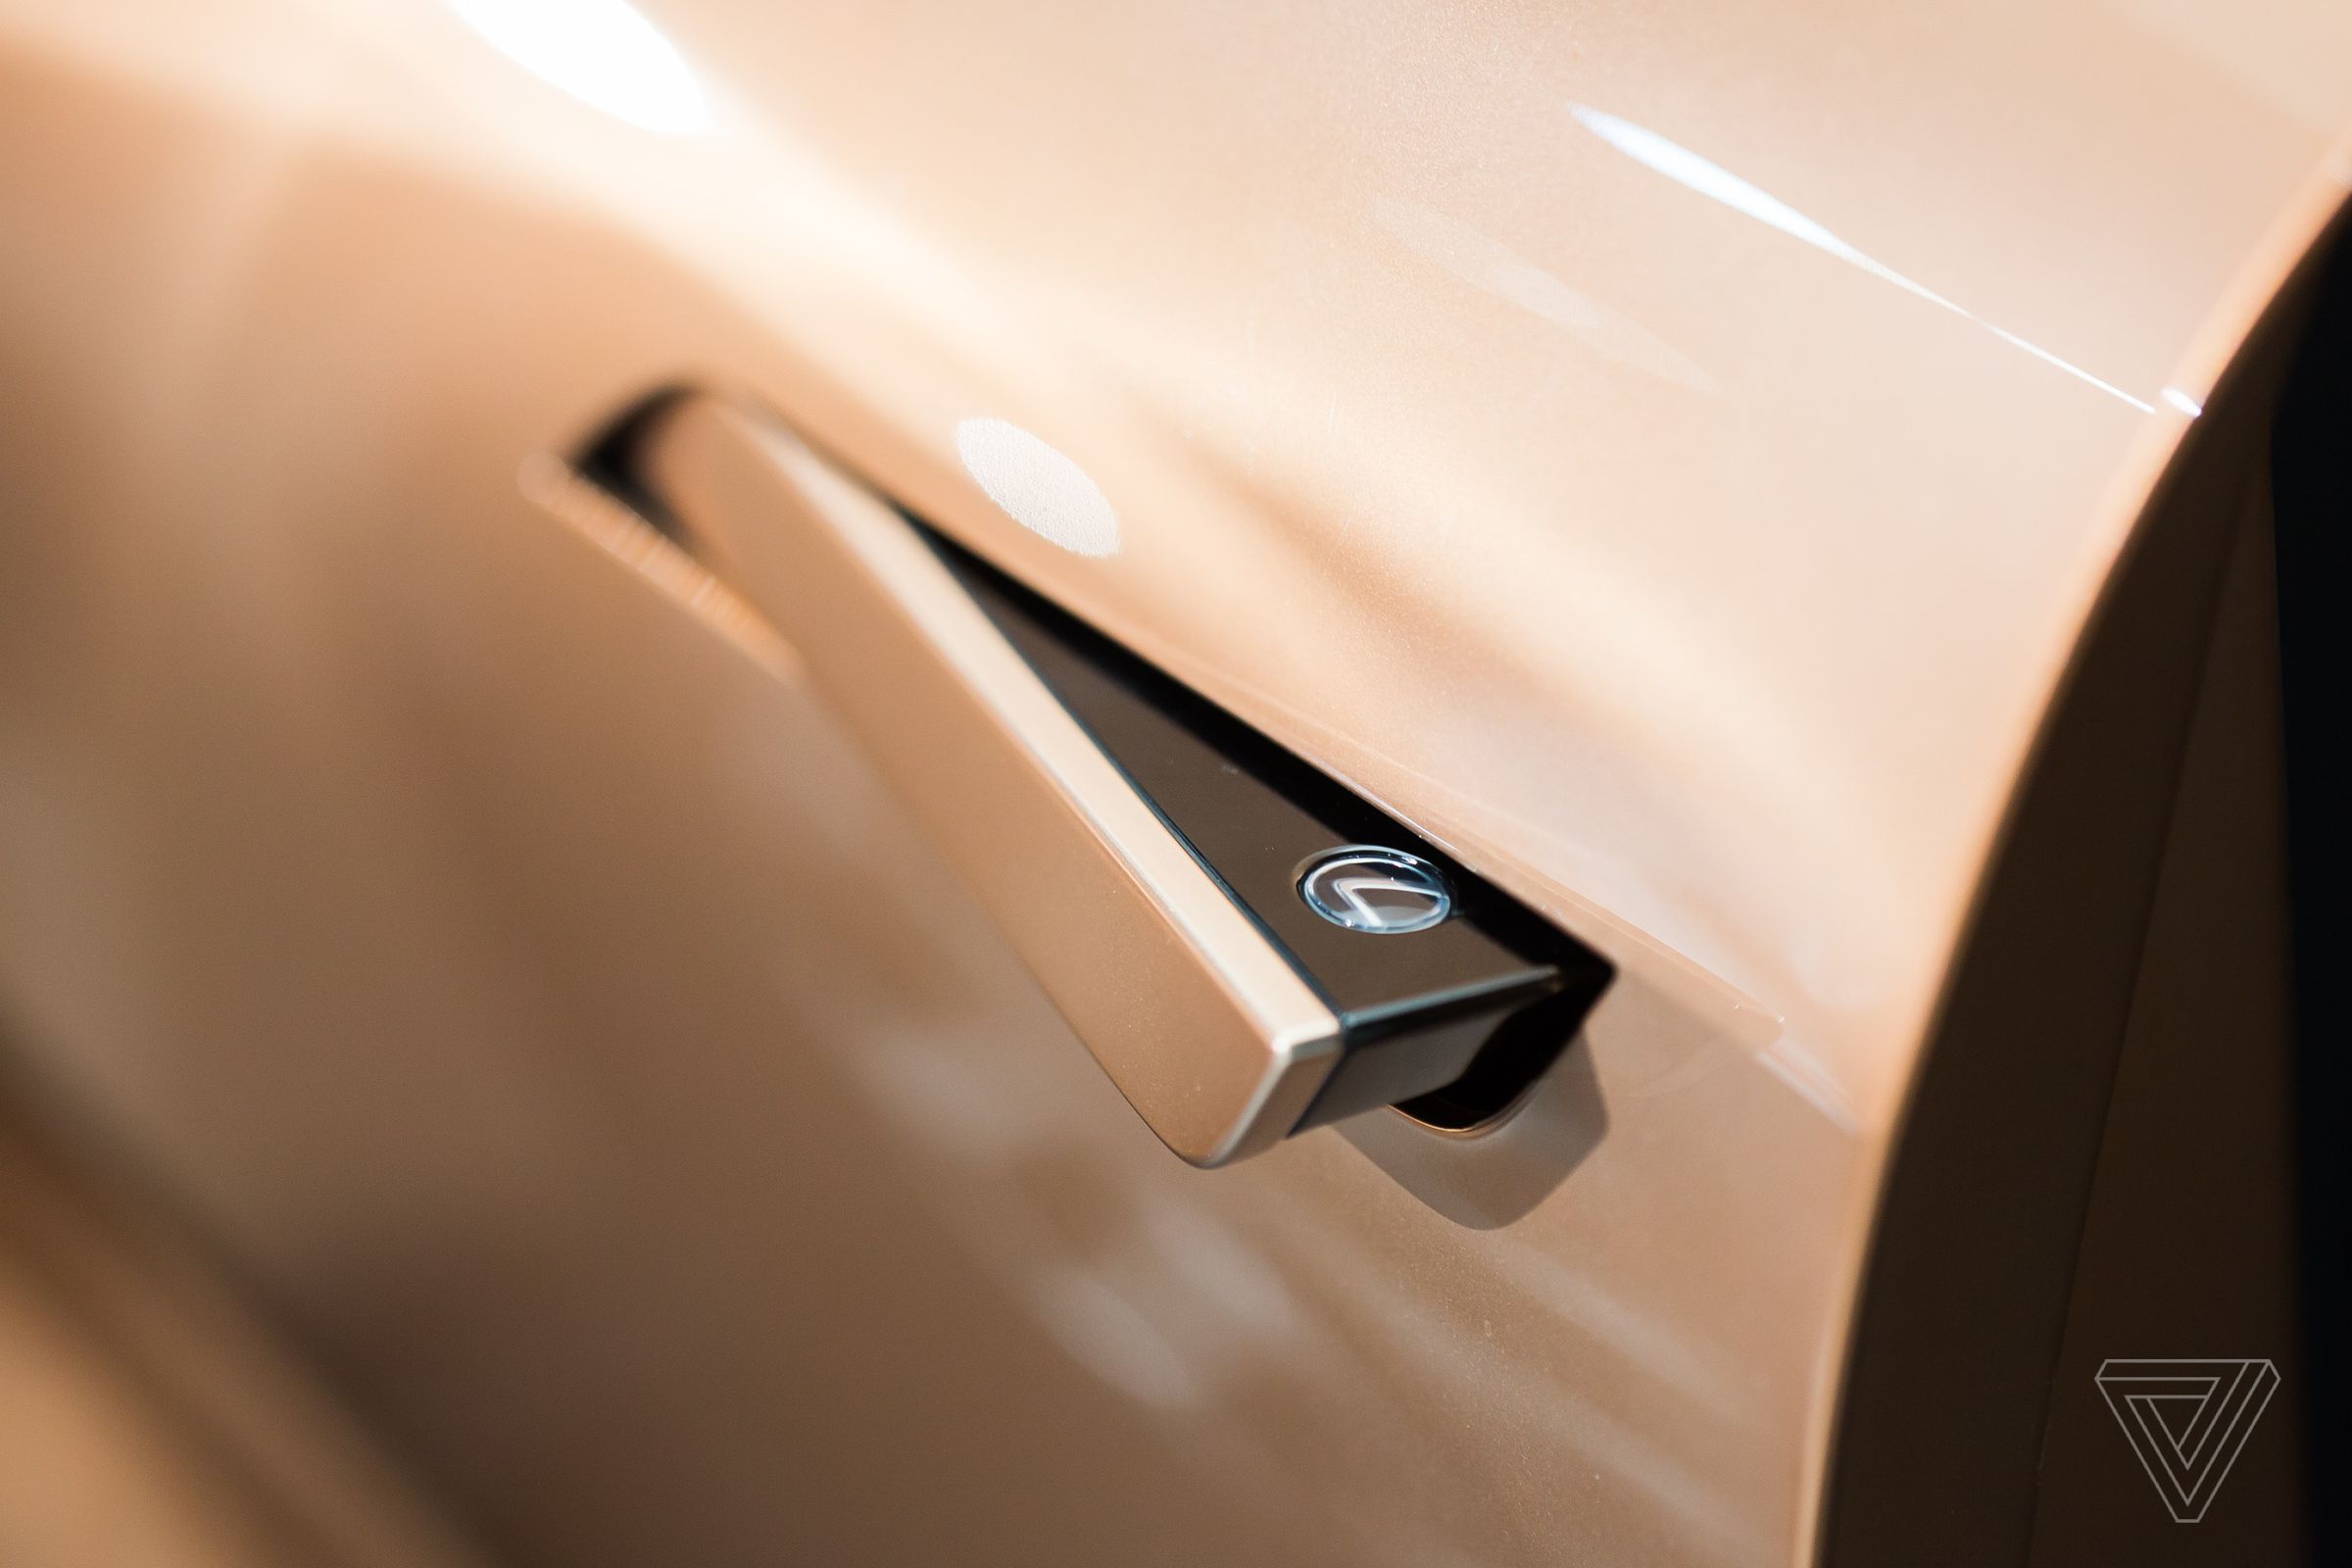 The Lexus LF-1 Limitless concept’s door handles pop out of the SUV’s smooth frame. See more photos here.